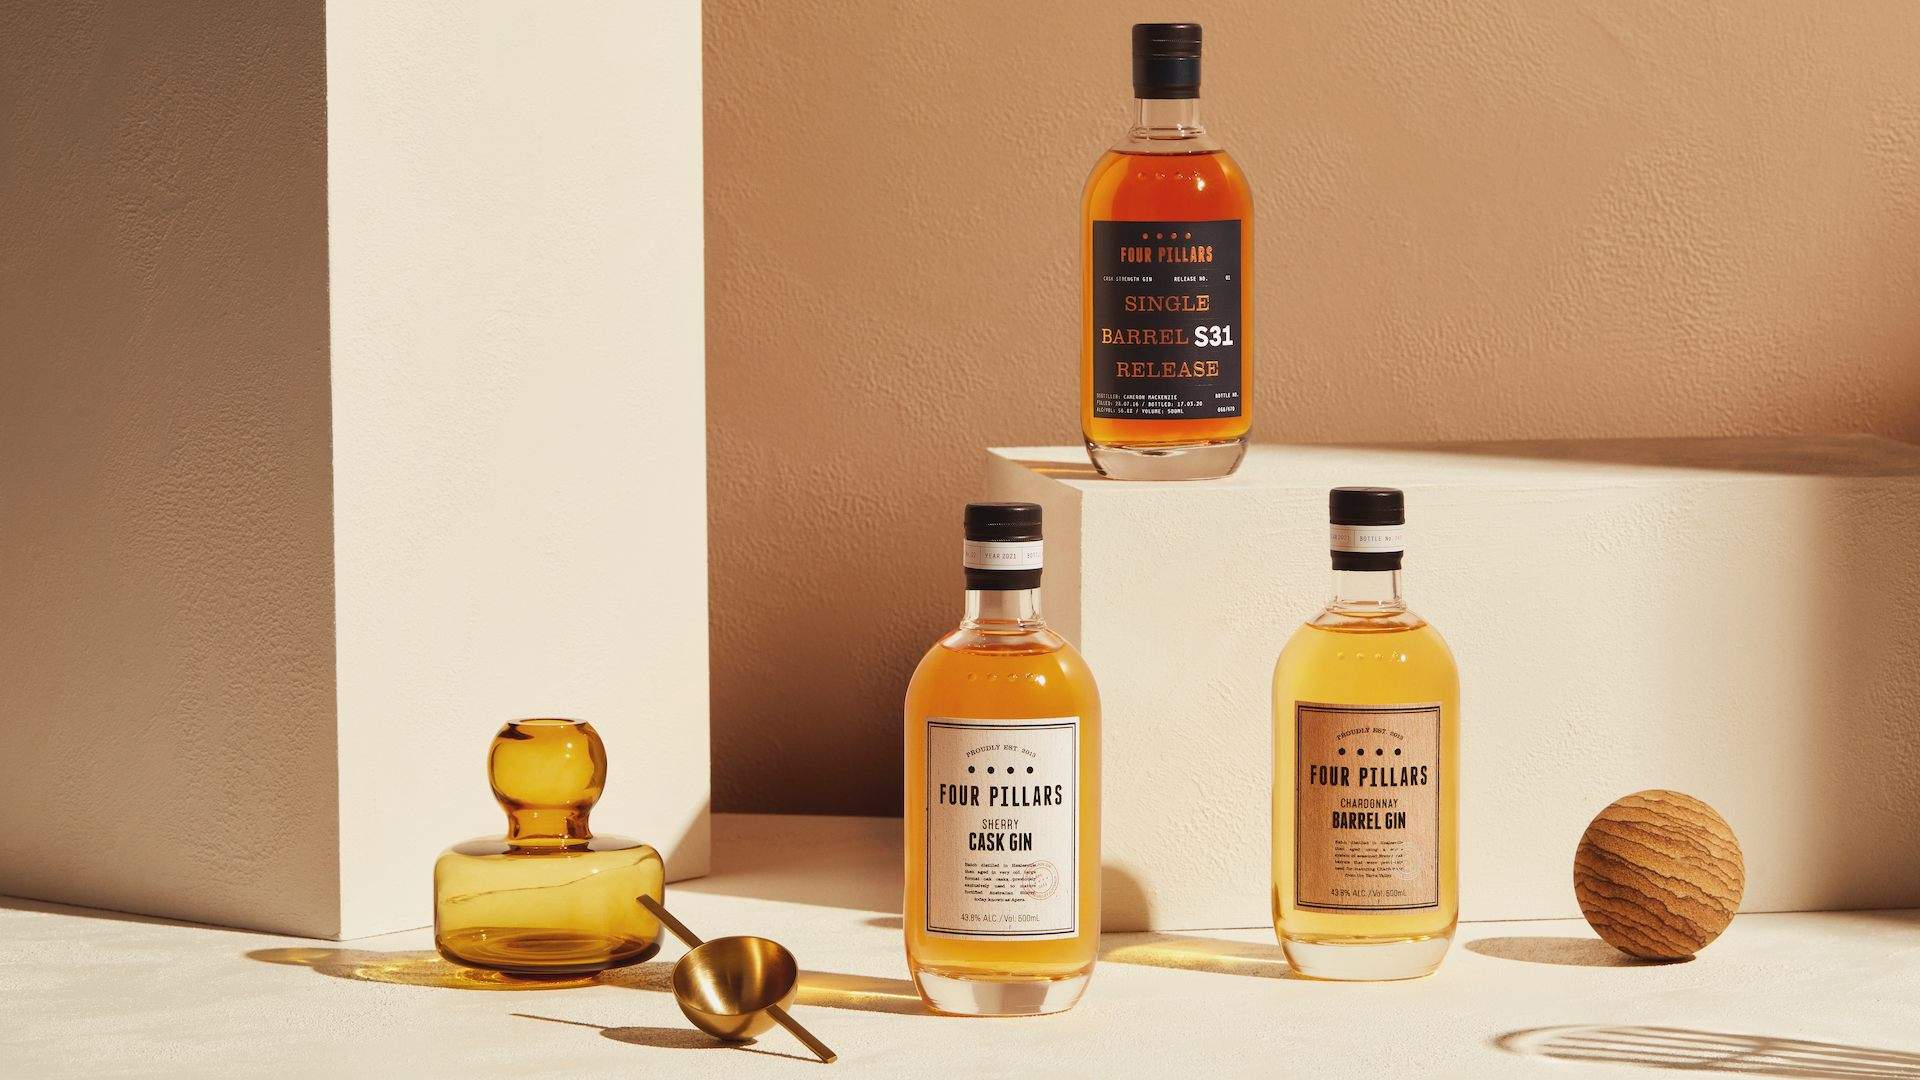 Four Pillars Has Released Its 2021 Barrel-Aged Gins So You Can Keep Adding to Your Gin Shrine